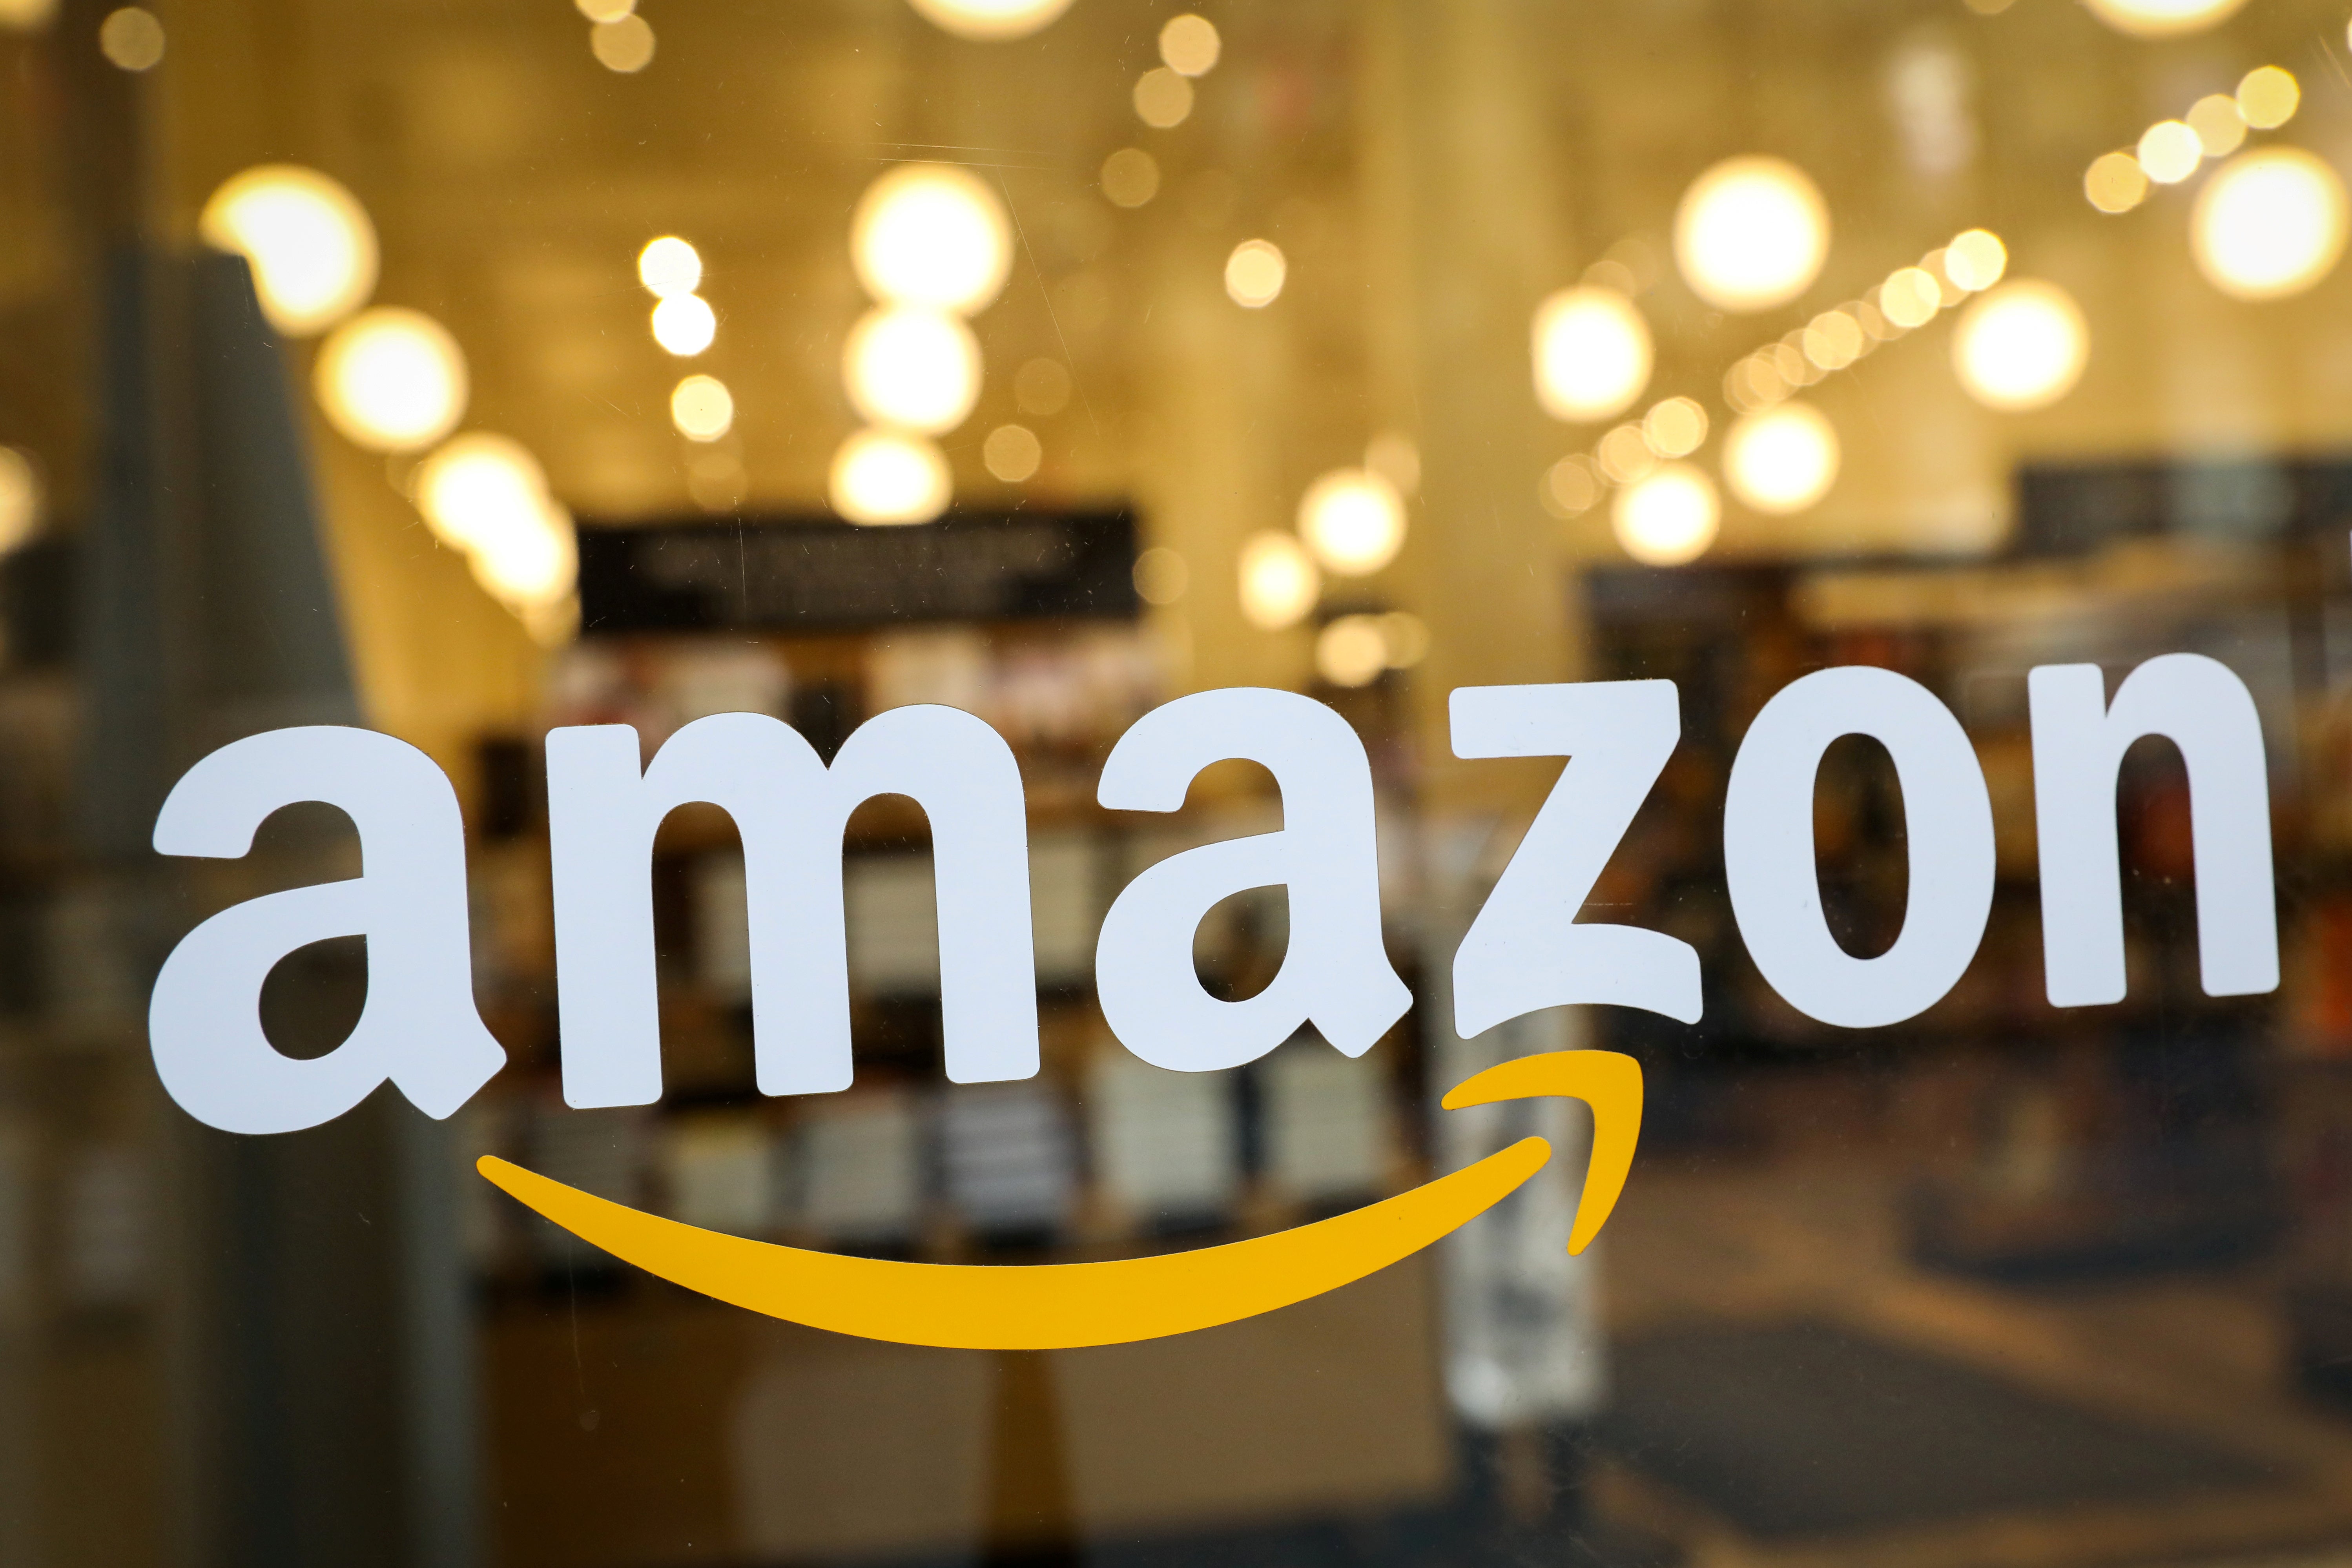 Amazon has accused Indian firms of violating pre-existing contract